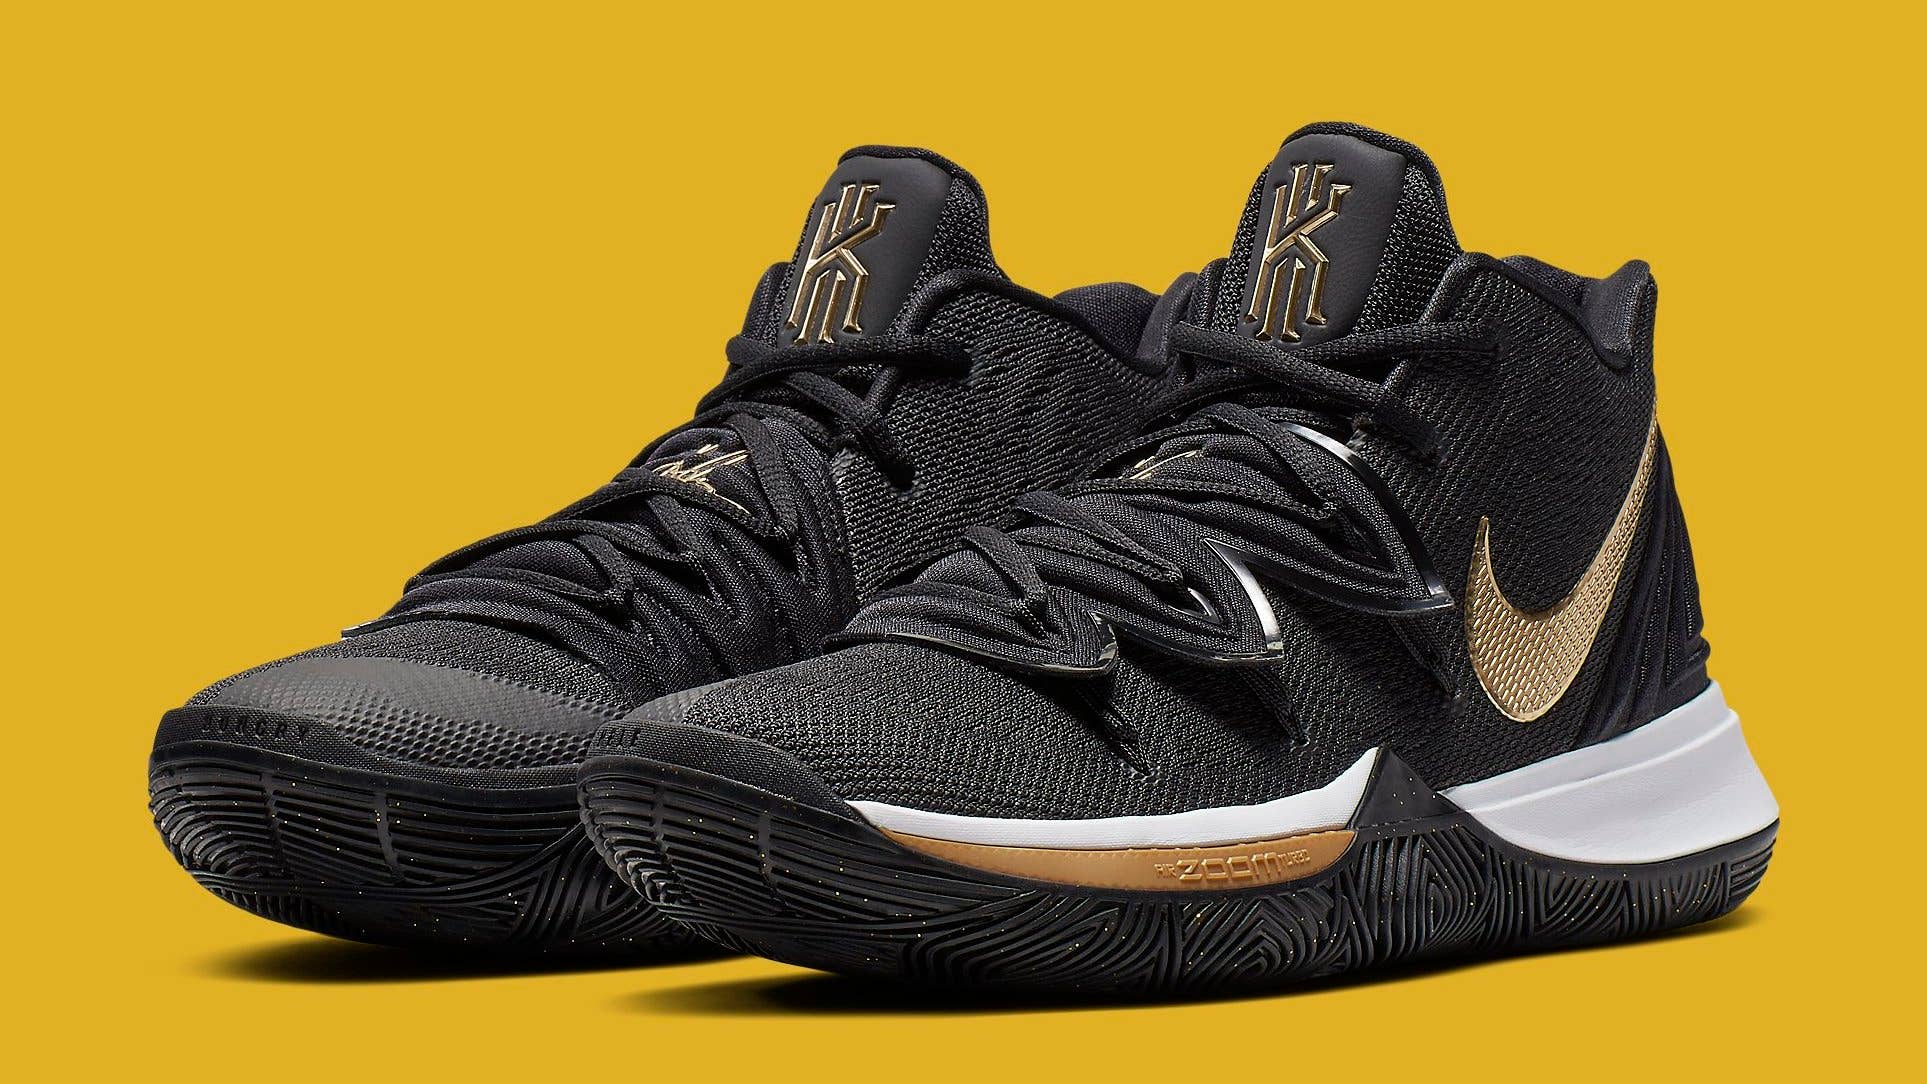 Nike Kyrie Low 5 Basketball Shoes - White, Gold & Black - Each